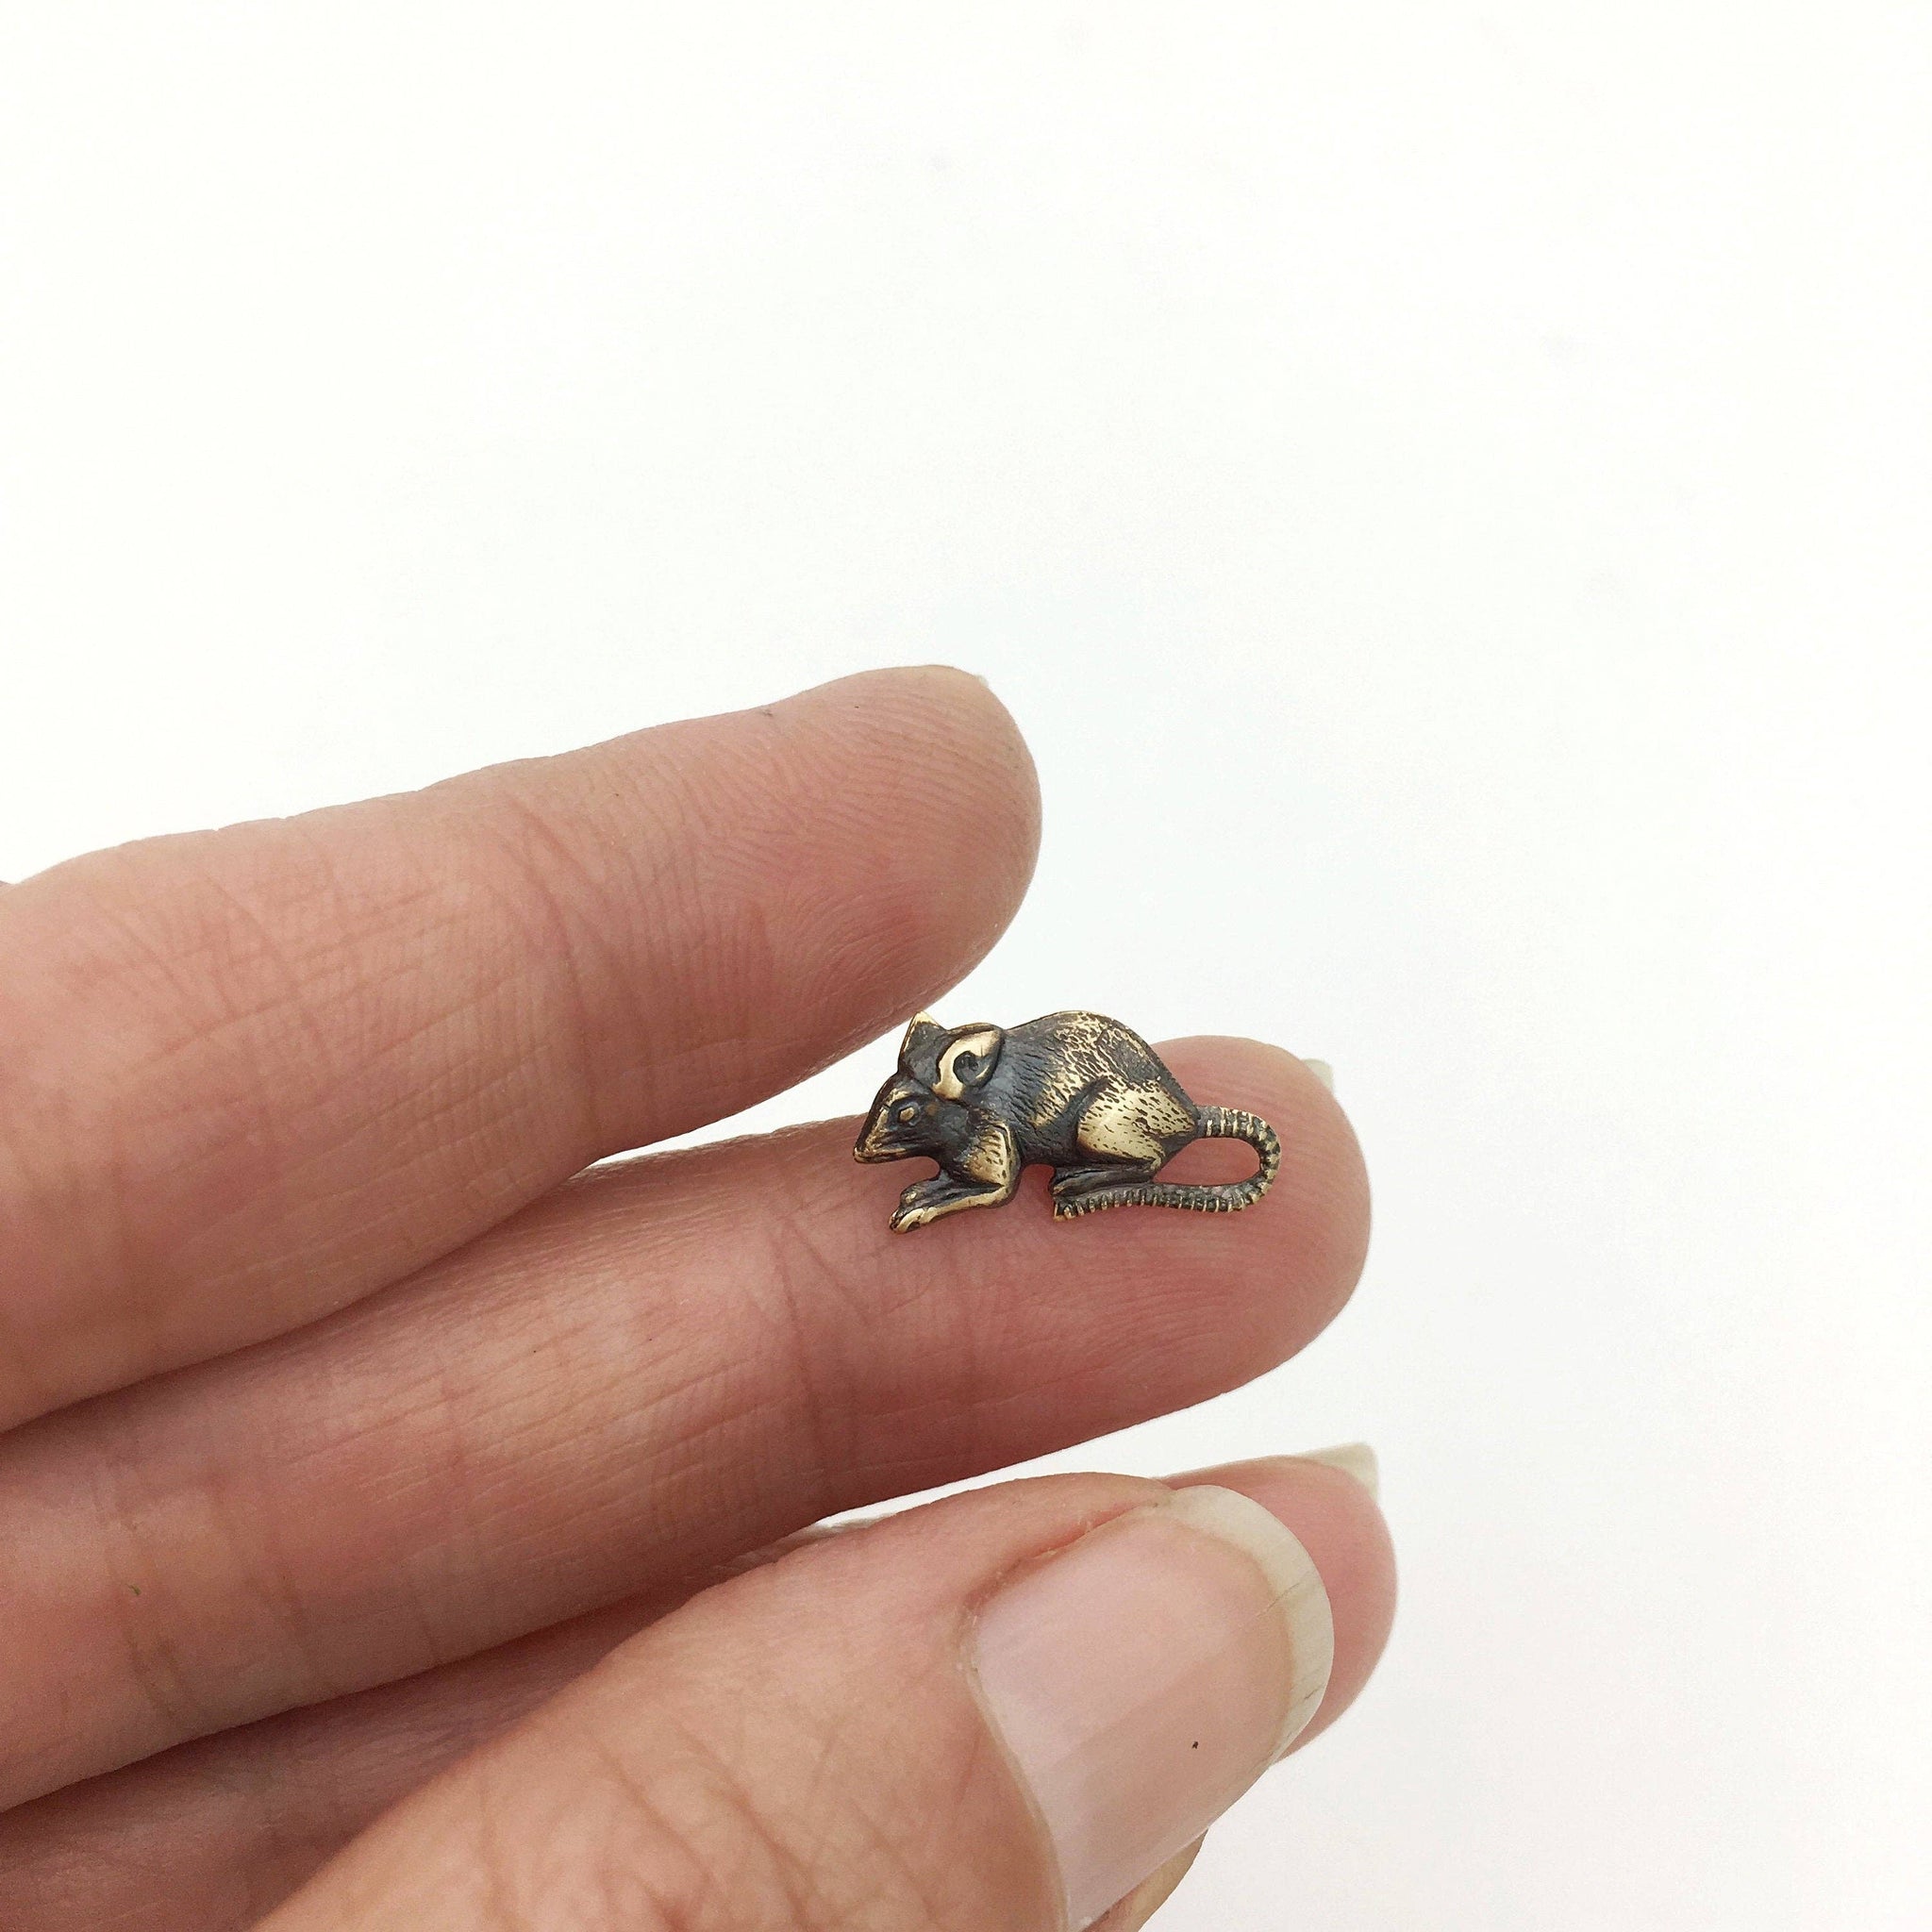 Metal Cloth & Wood - Rat or Mouse Lapel Pin Tie Tack or Brooch: Antique Gold